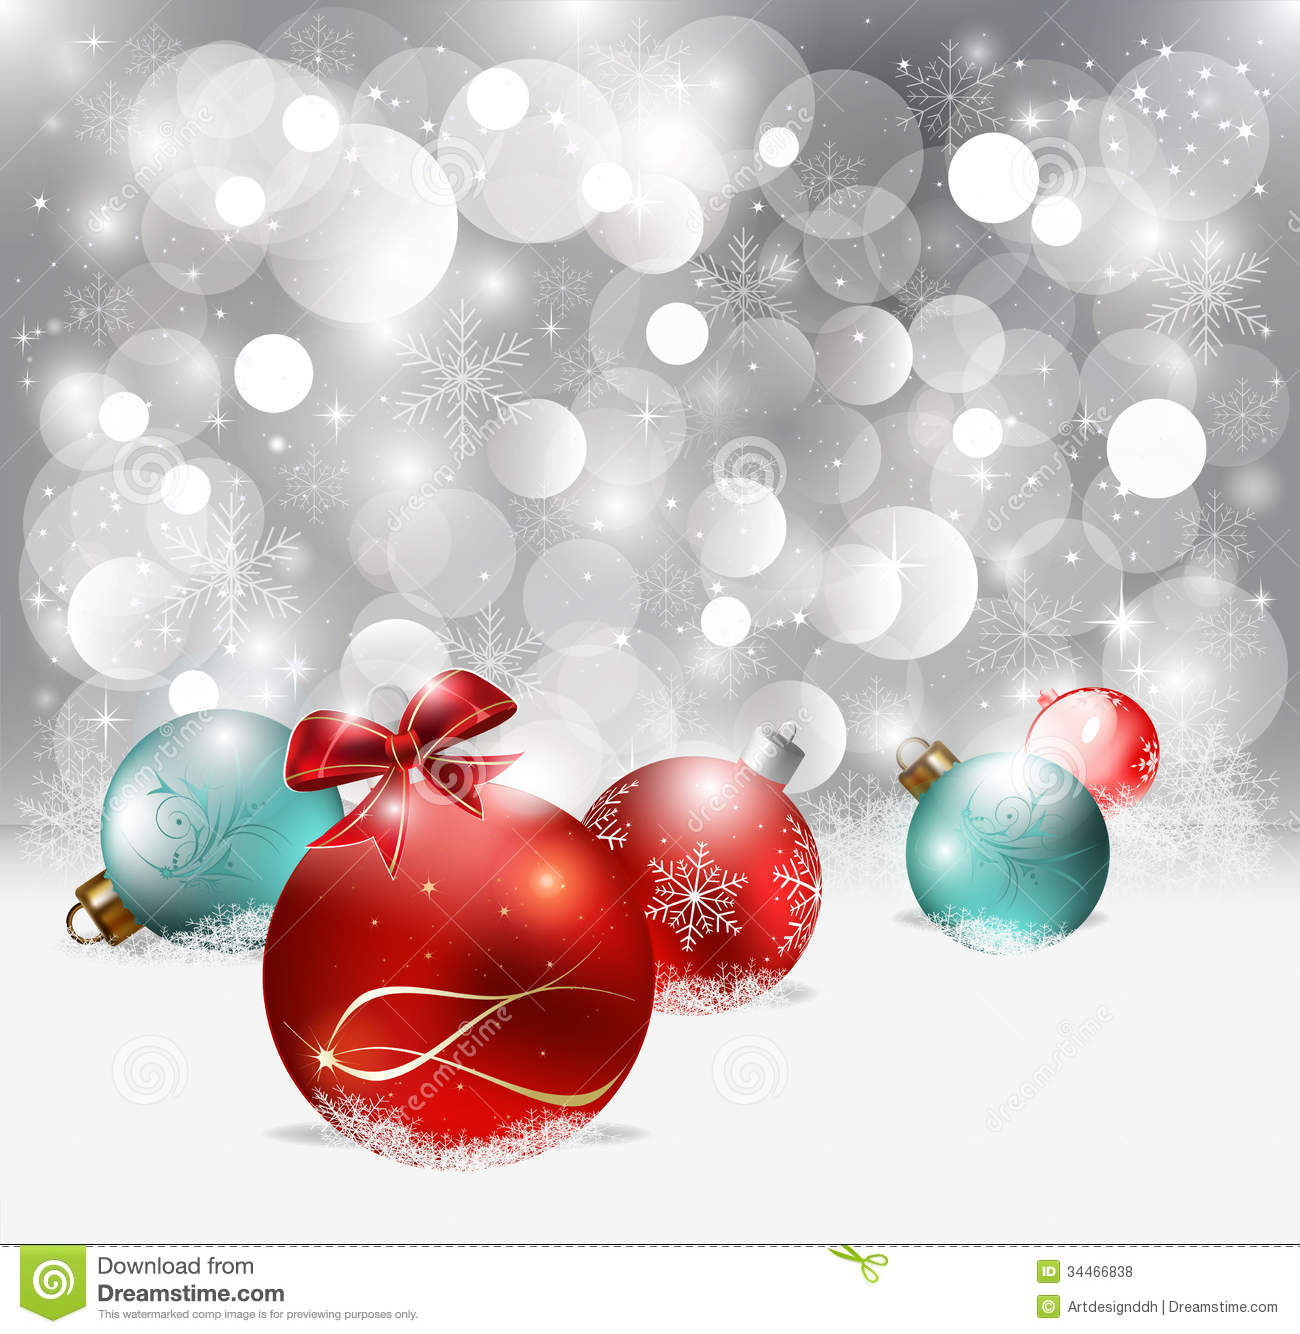 684 Christmas Background free clipart.